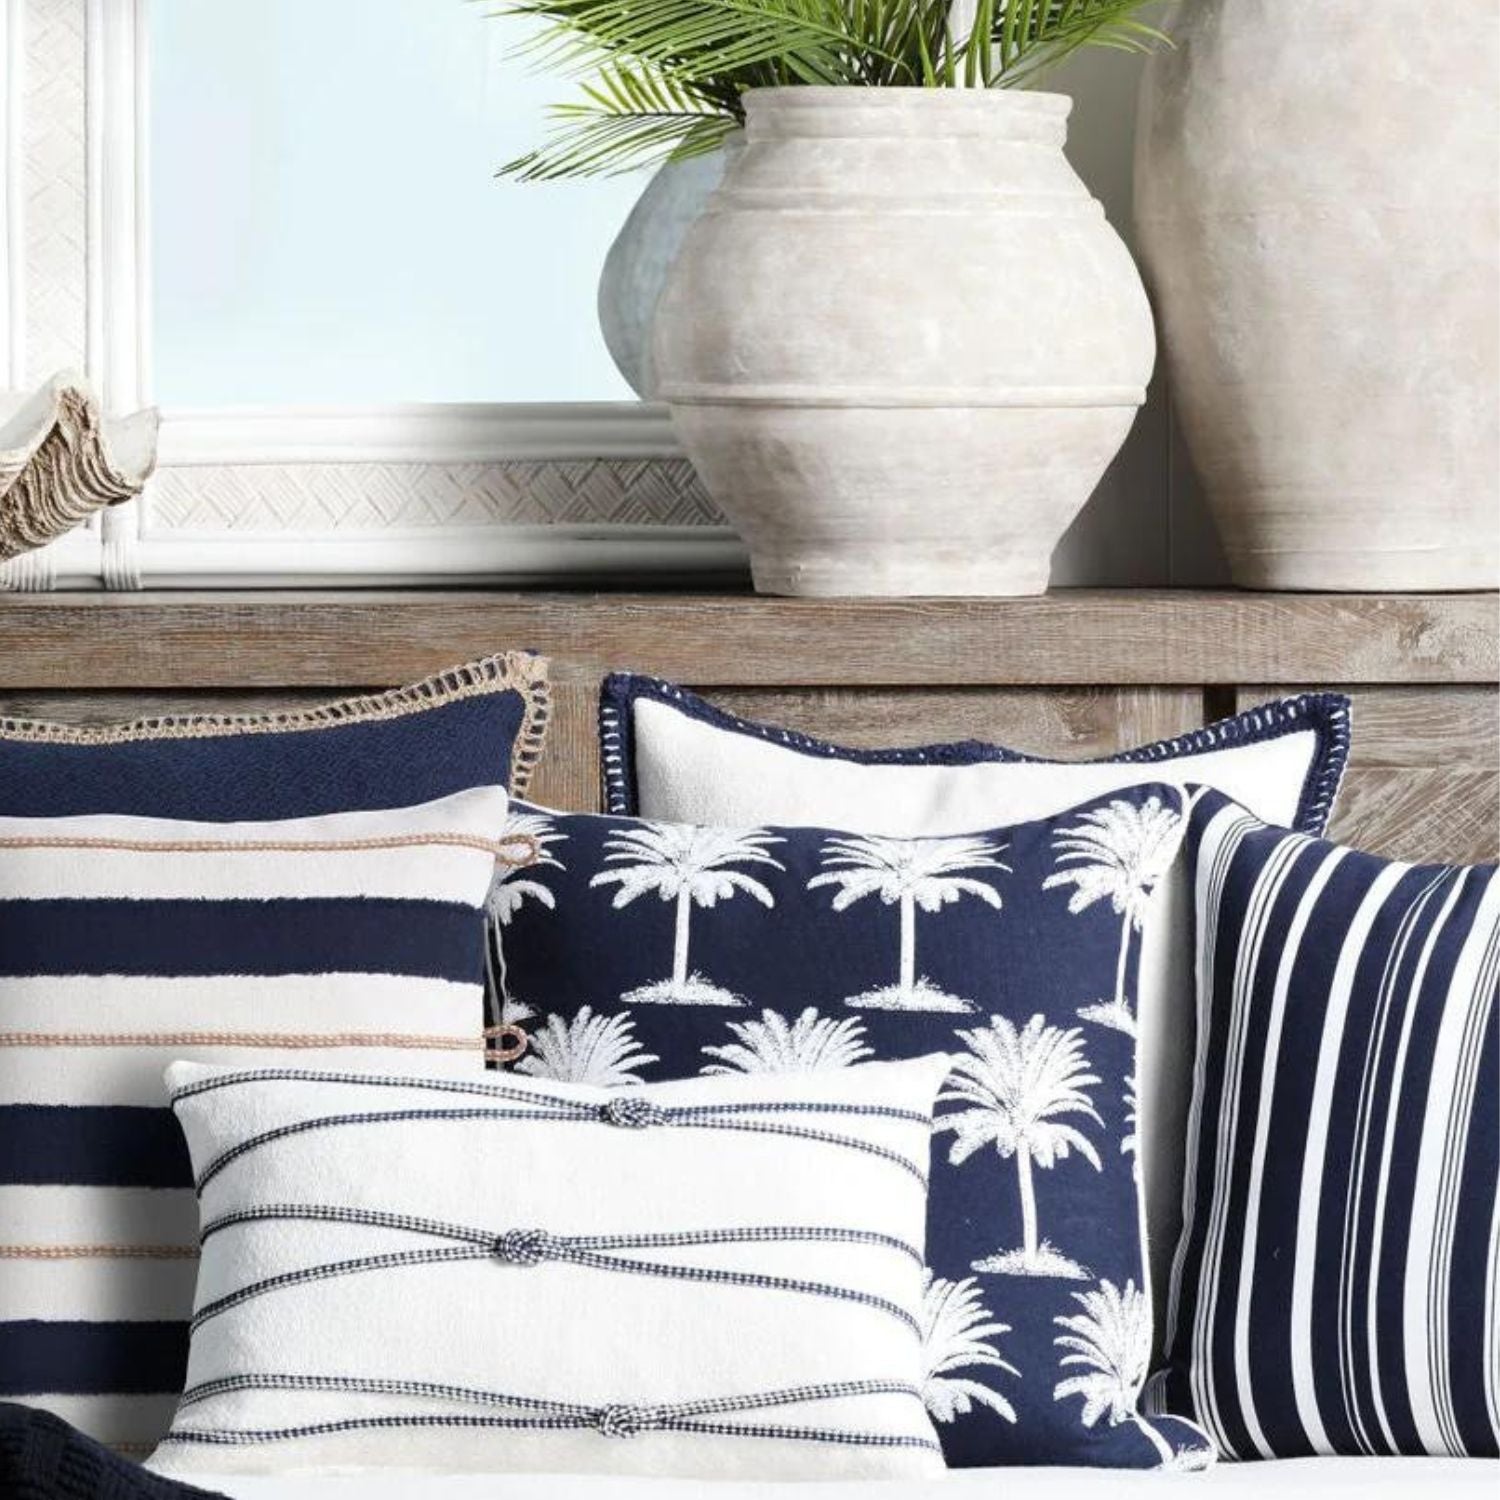 Nautical cushion white and blue with rope detailing 30x50